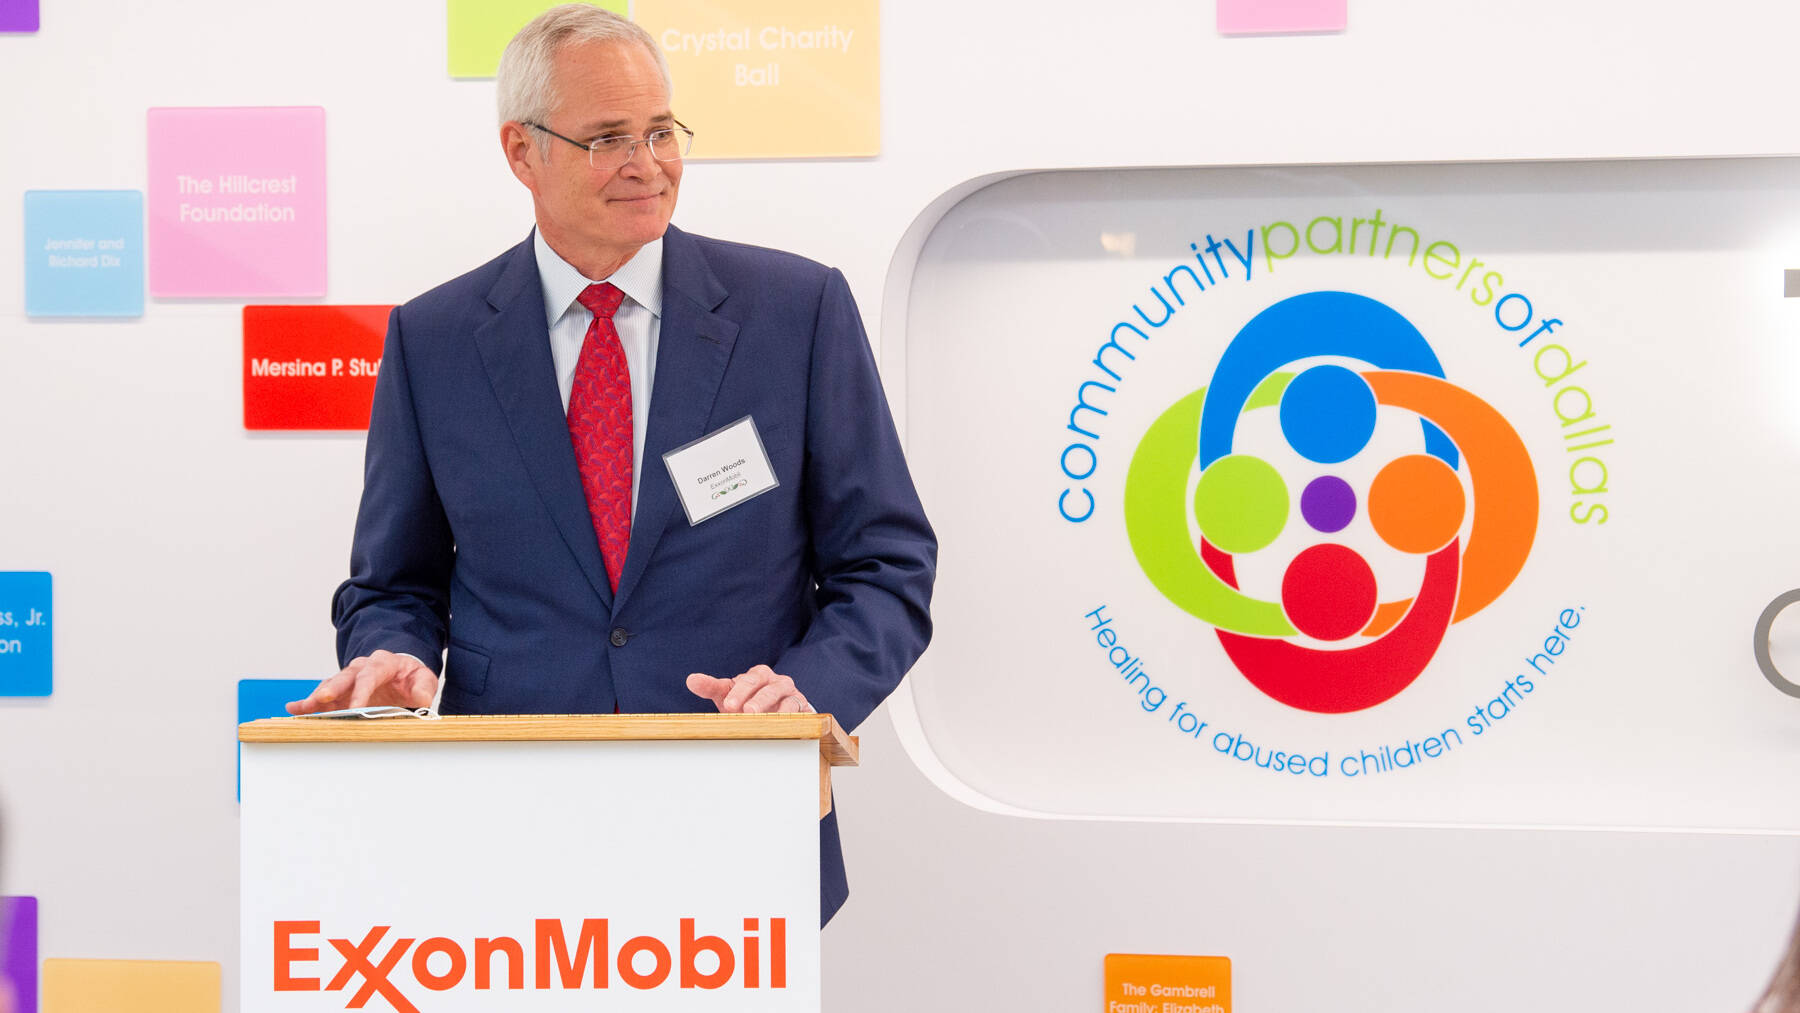 Darren Woods, chief executive officer of Exxon Mobil Corporation.